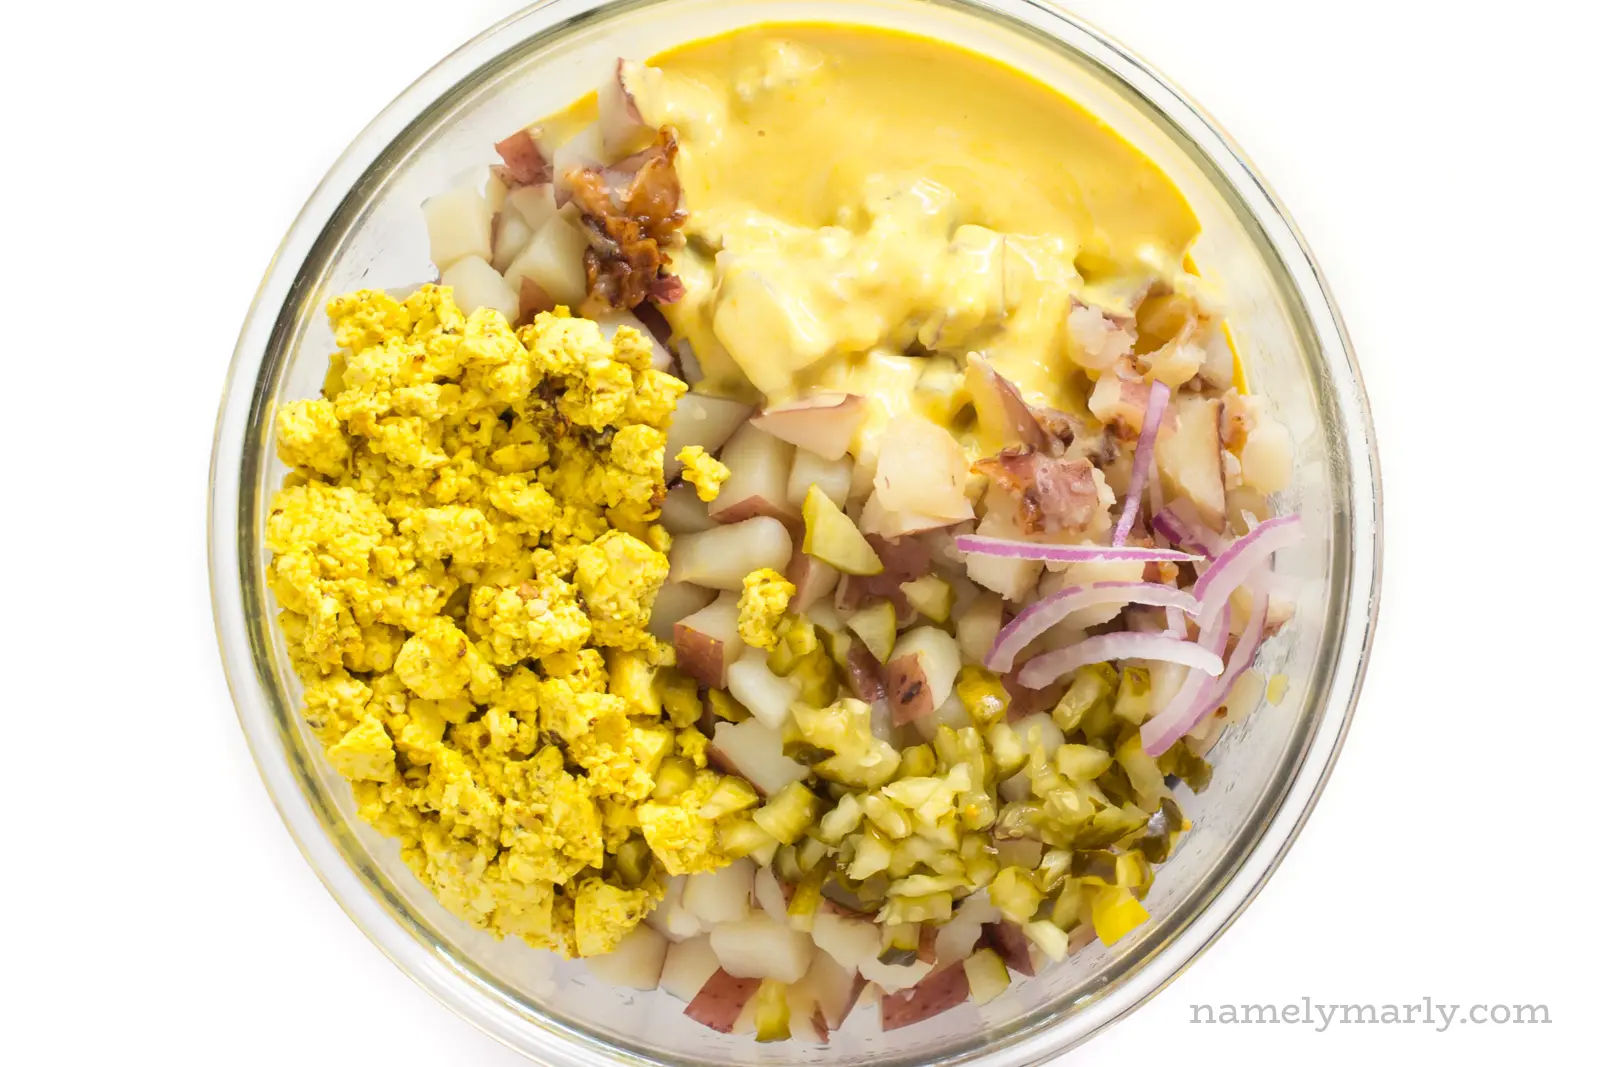 A bowl contains the ingredients, like potatoes, onions, and sauce for vegan potato salad.